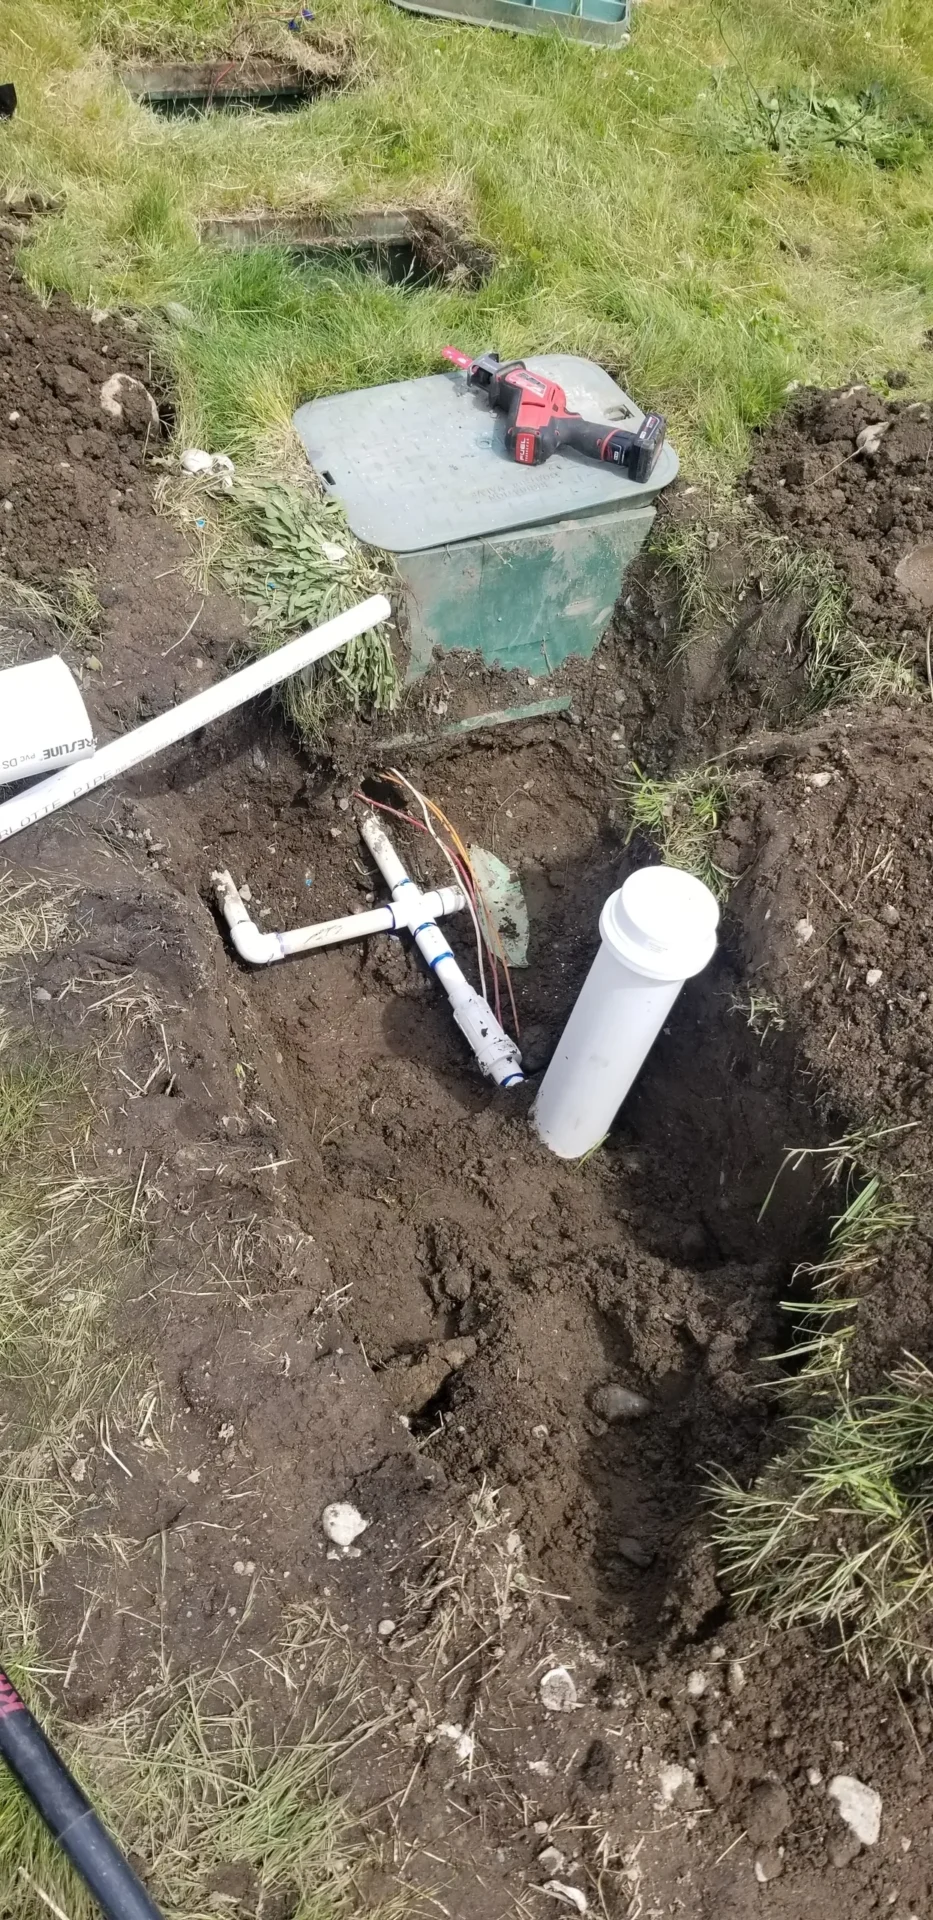 A pipe laying in the ground next to a white tube.